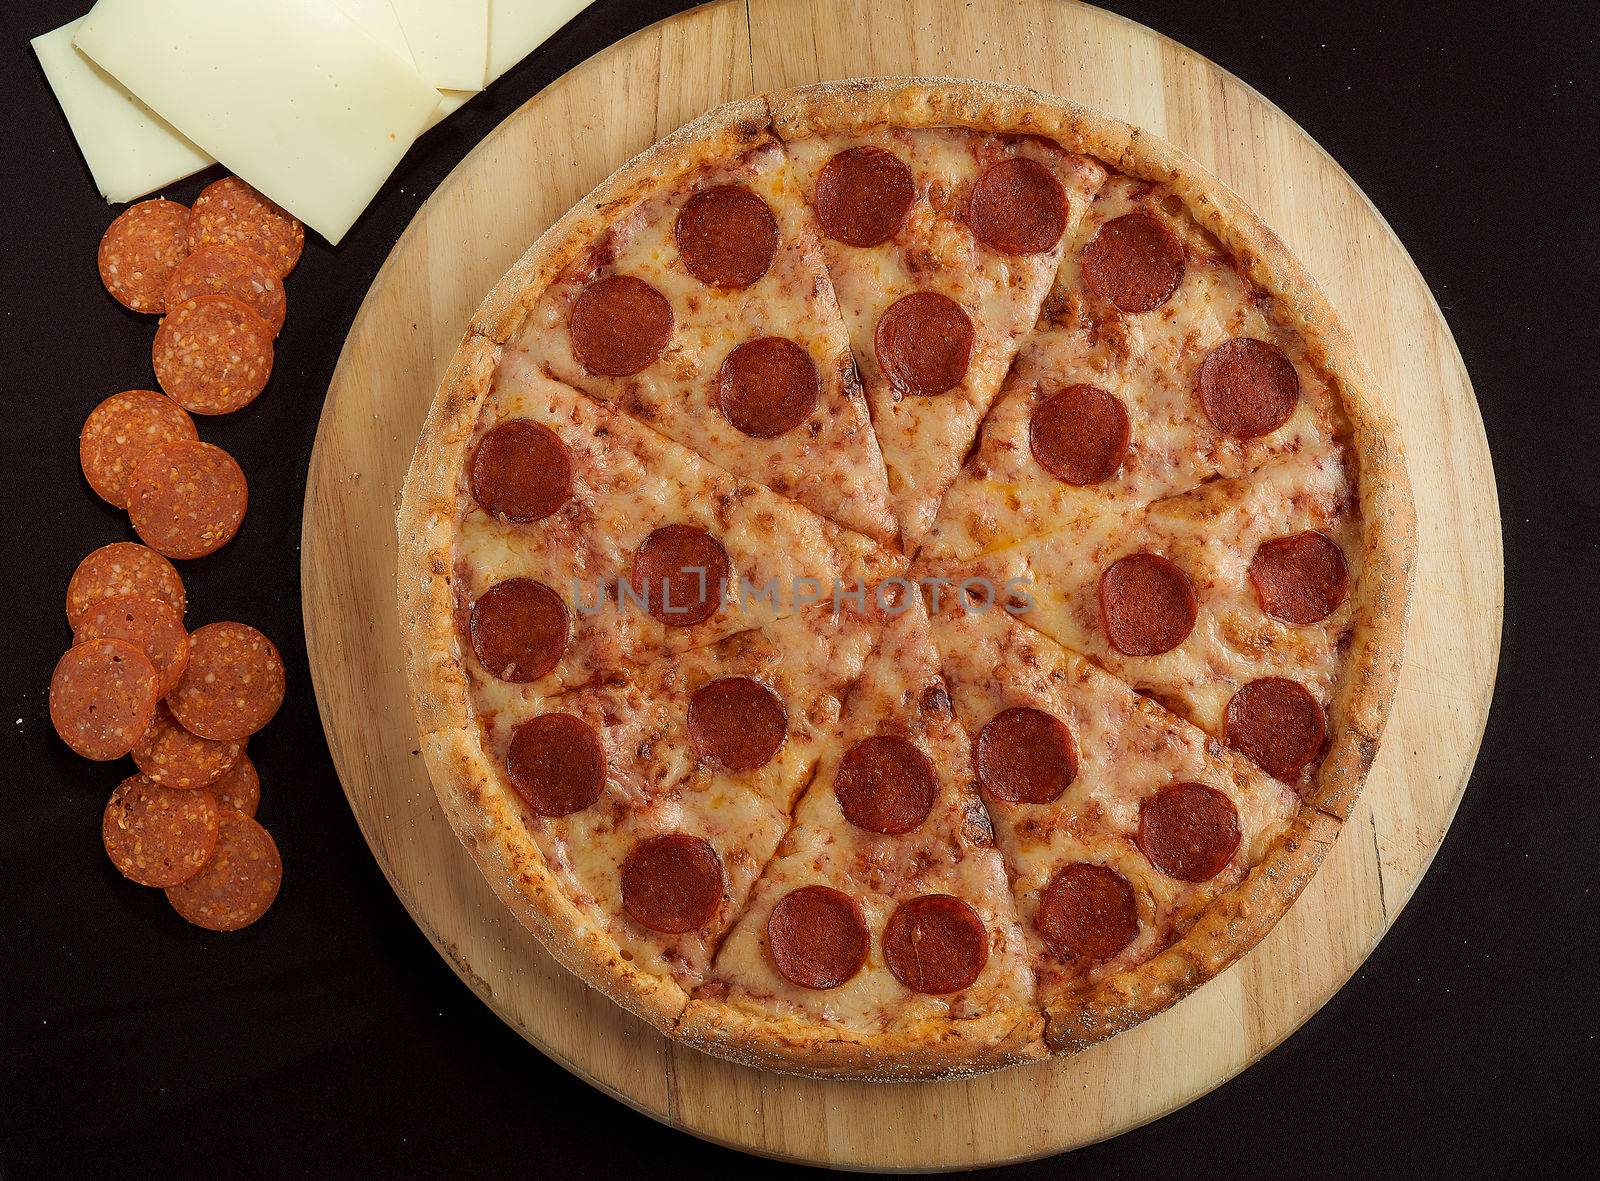 Large pepperoni pizza with ingredients on a black top view background top view photo